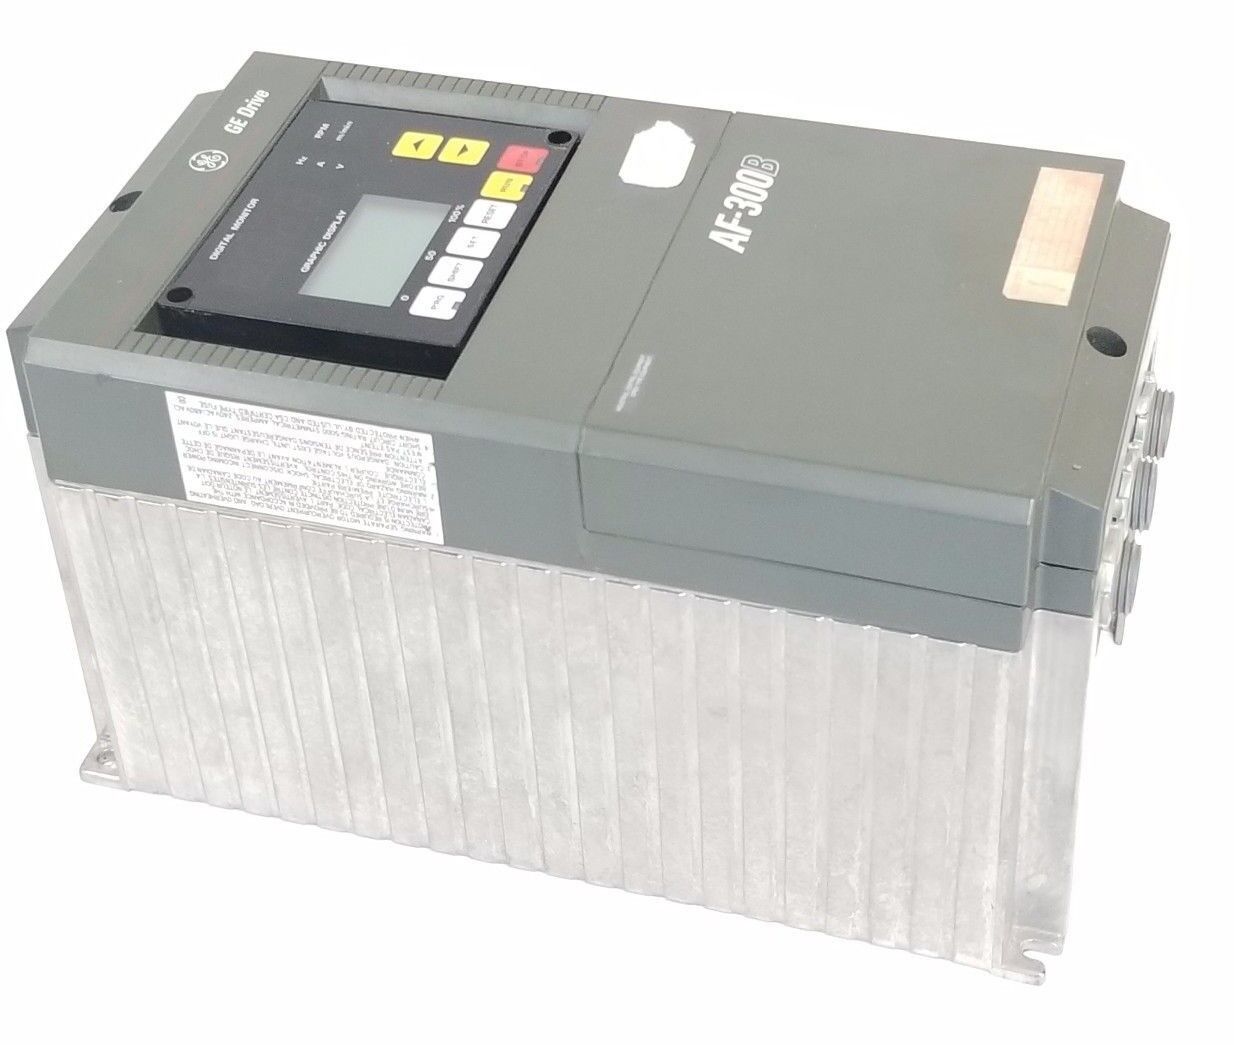 GENERAL ELECTRIC 6VAF343005B-A2 VARIABLE FREQUENCY DRIVE AF-300 5HP, 460V, 9.5A